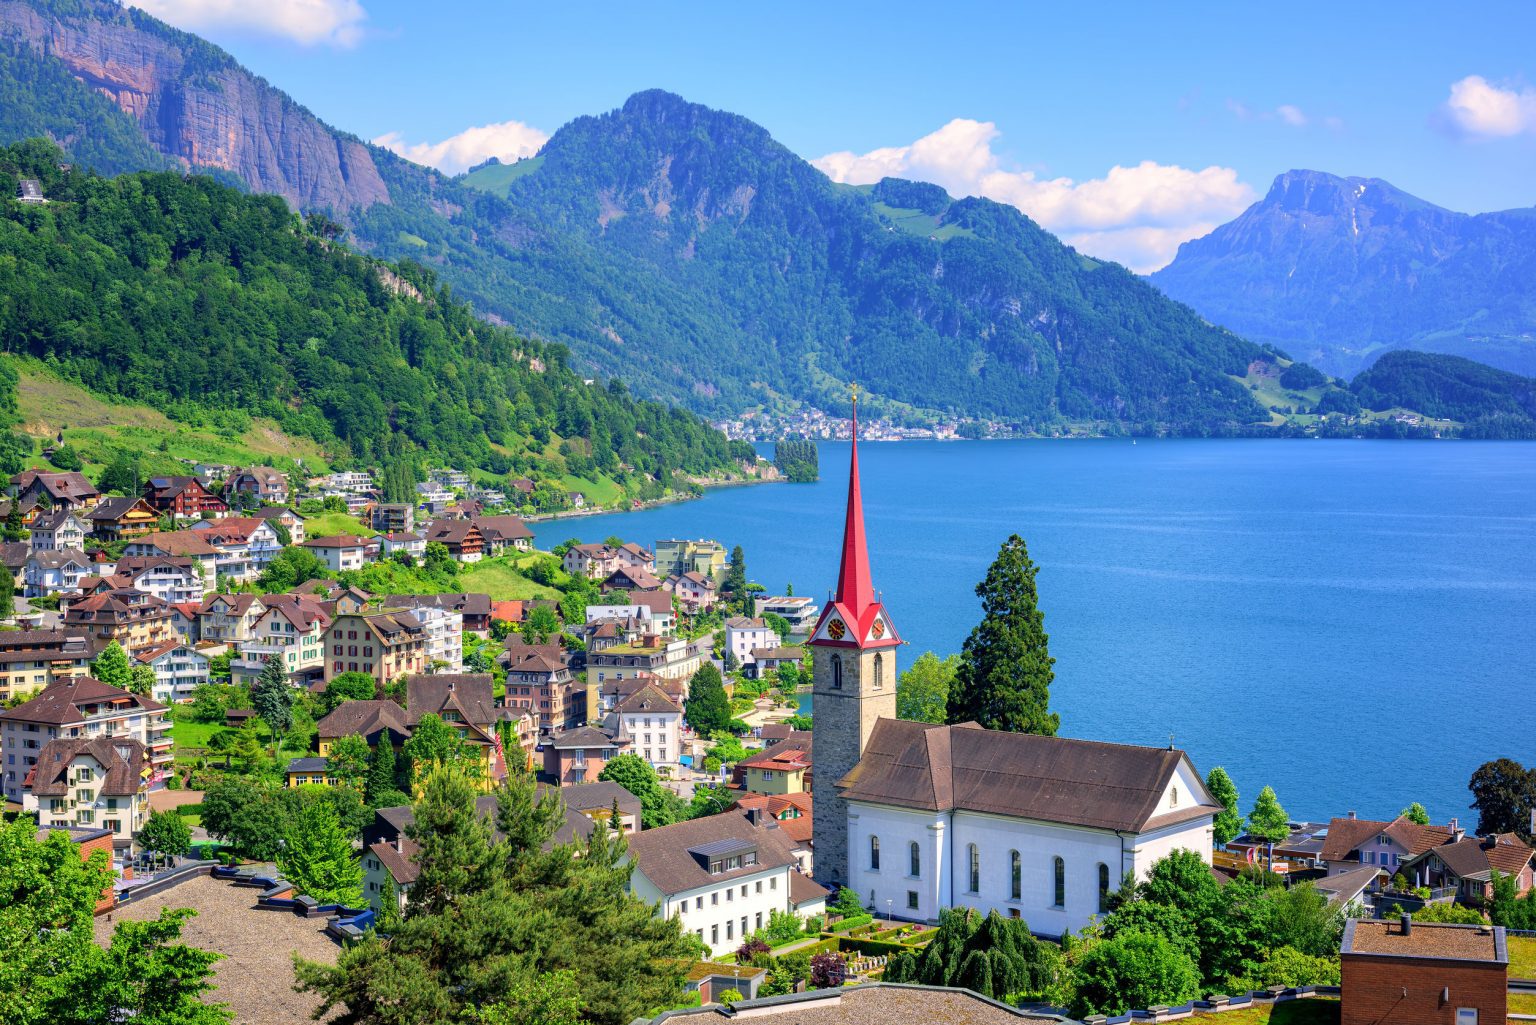 places to visit zug